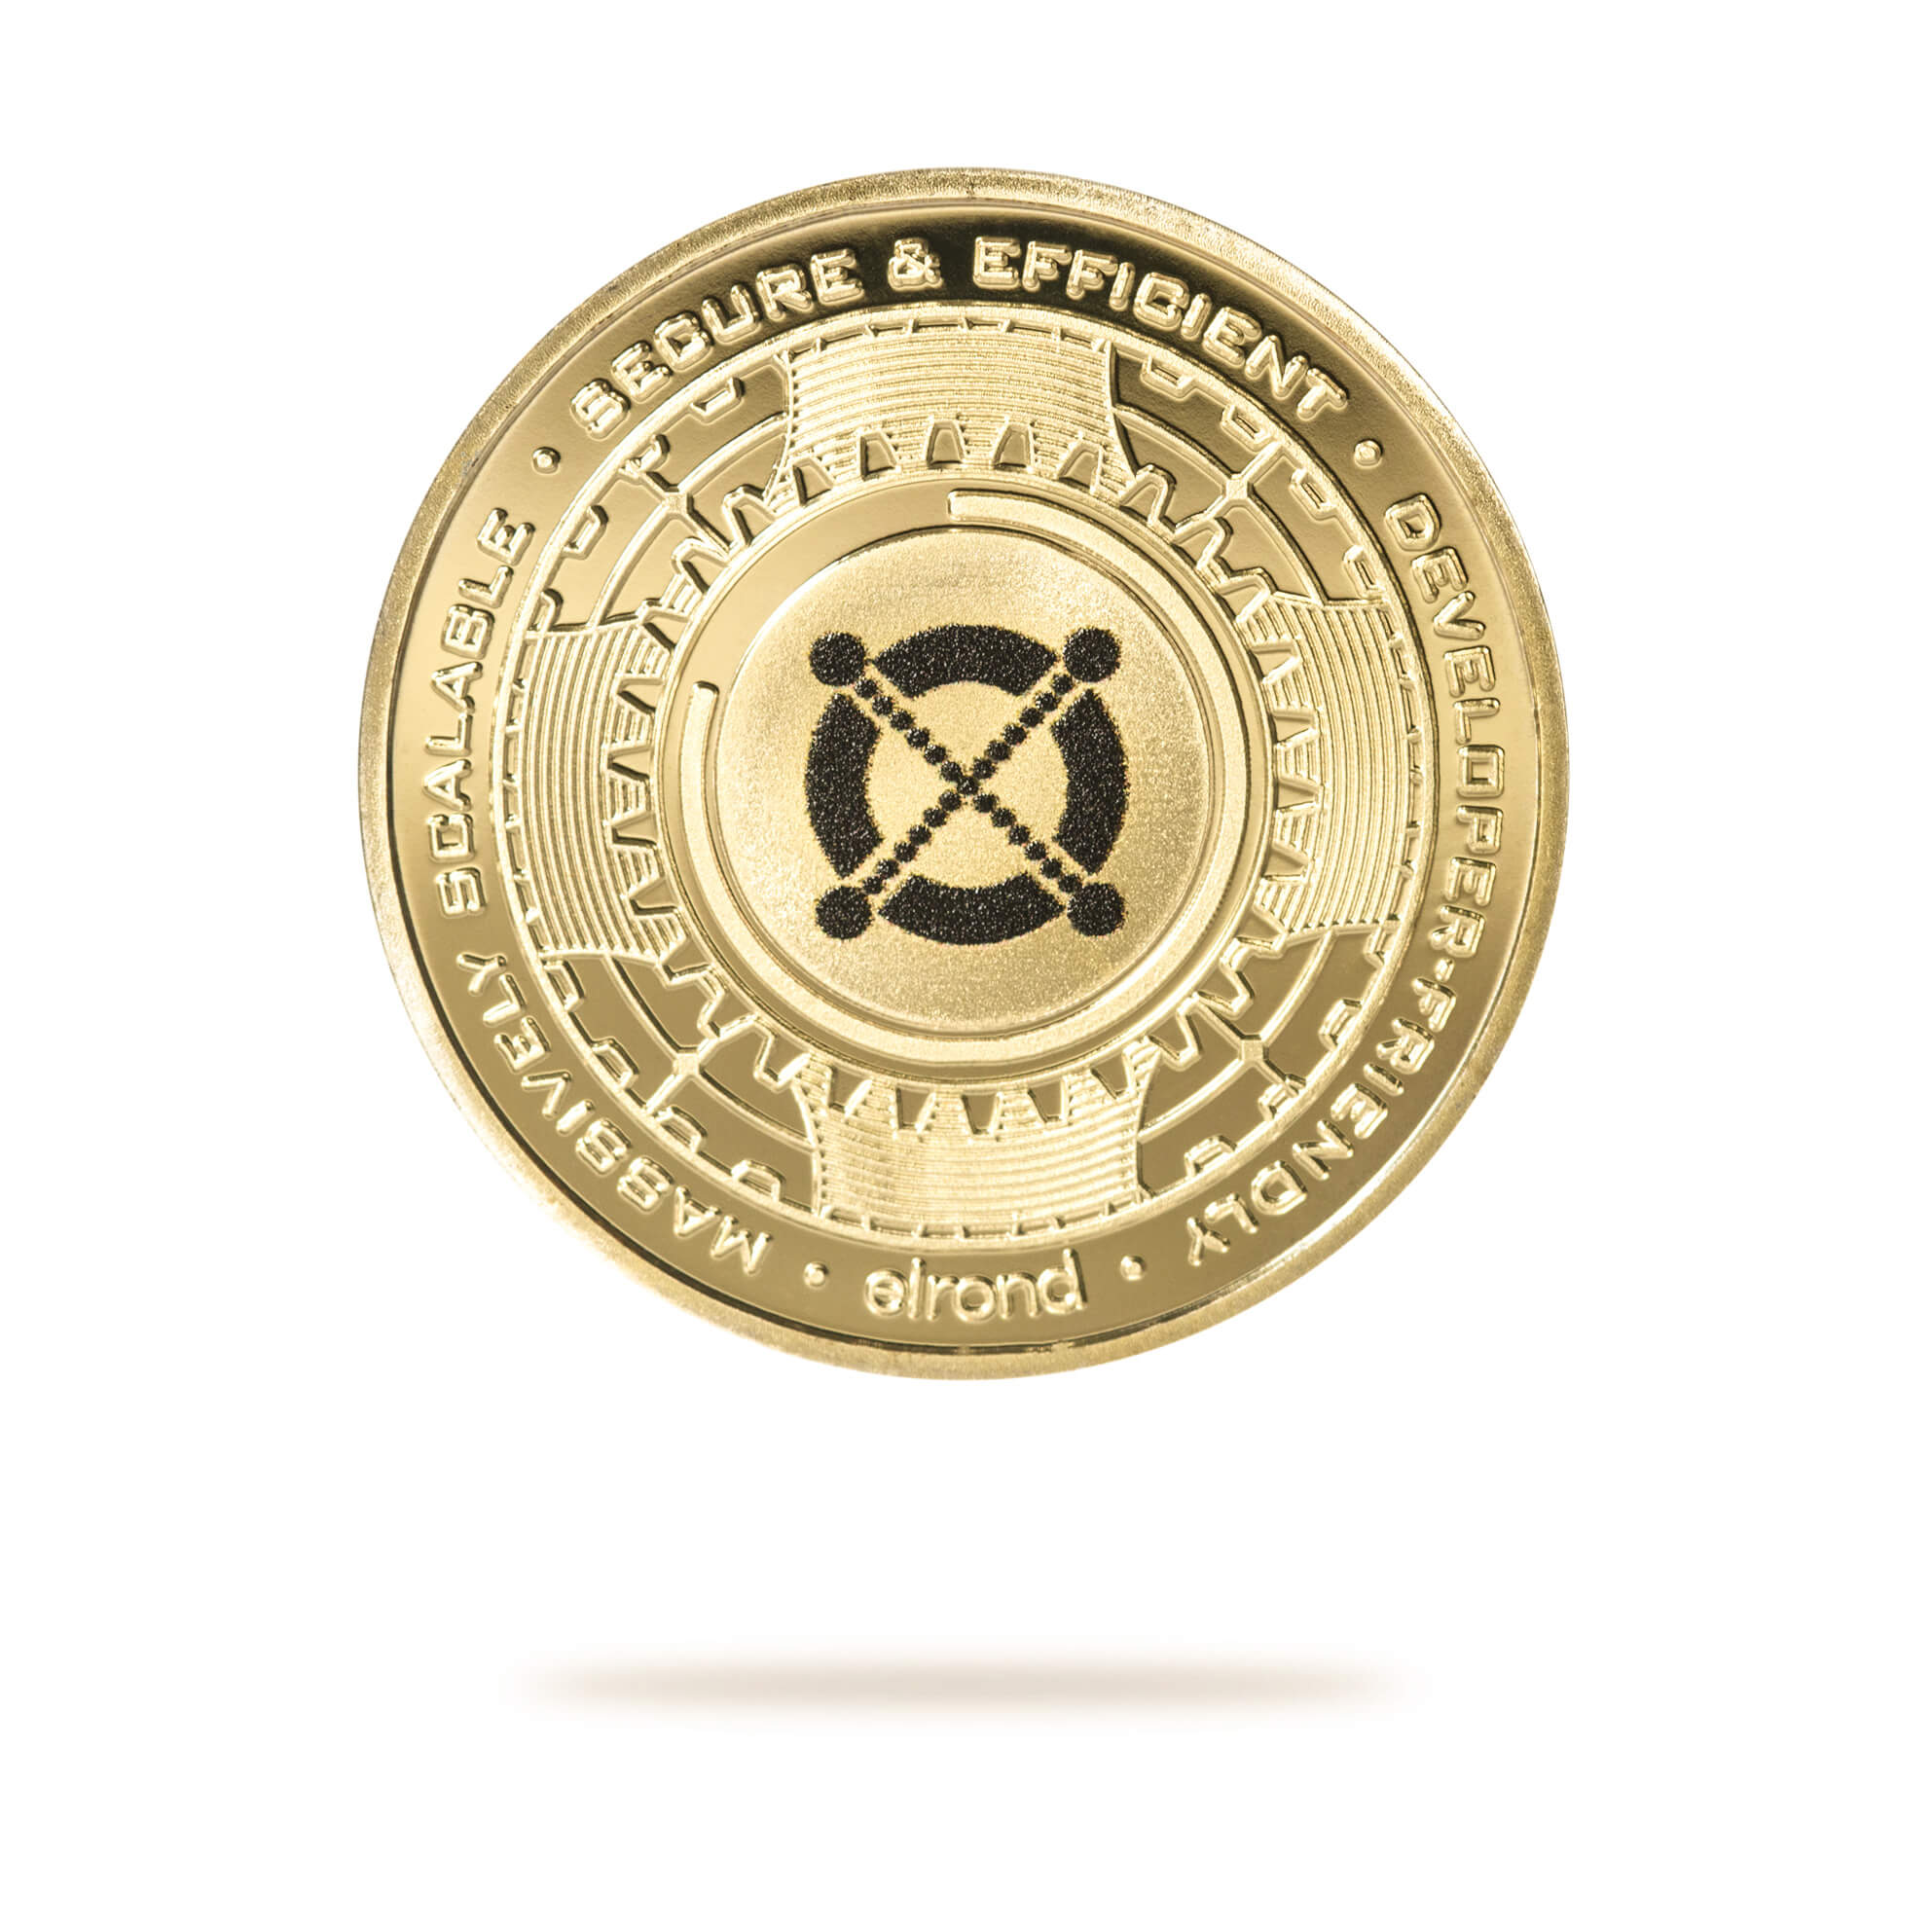 Cryptochips | Elrond Physical Crypto Coin. Collectable cryptocurrency merch you can hodl